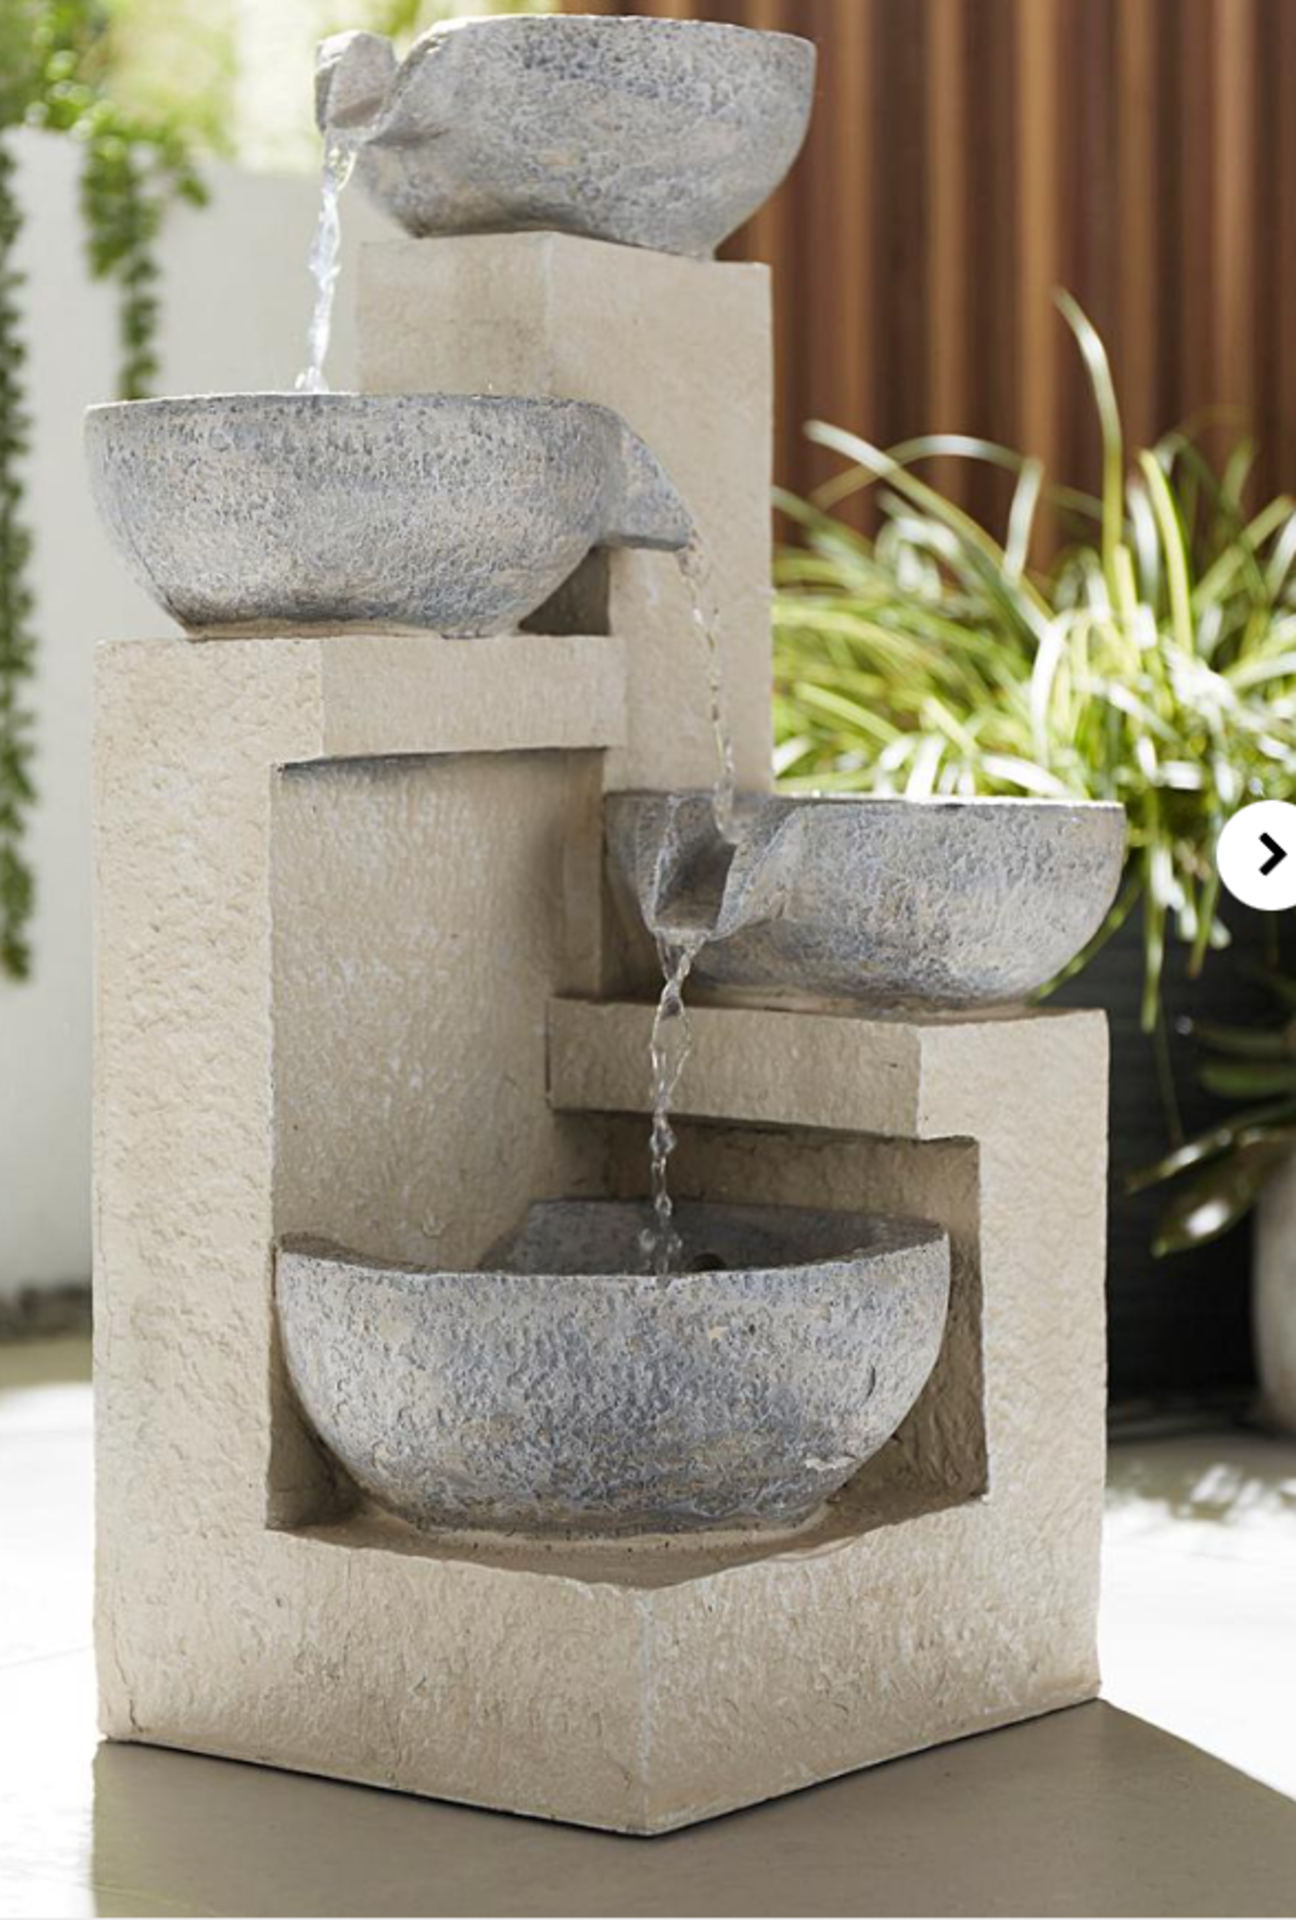 Cascade Fountain. - ER20. Adding a water fountain is a wonderful way to create a peaceful and